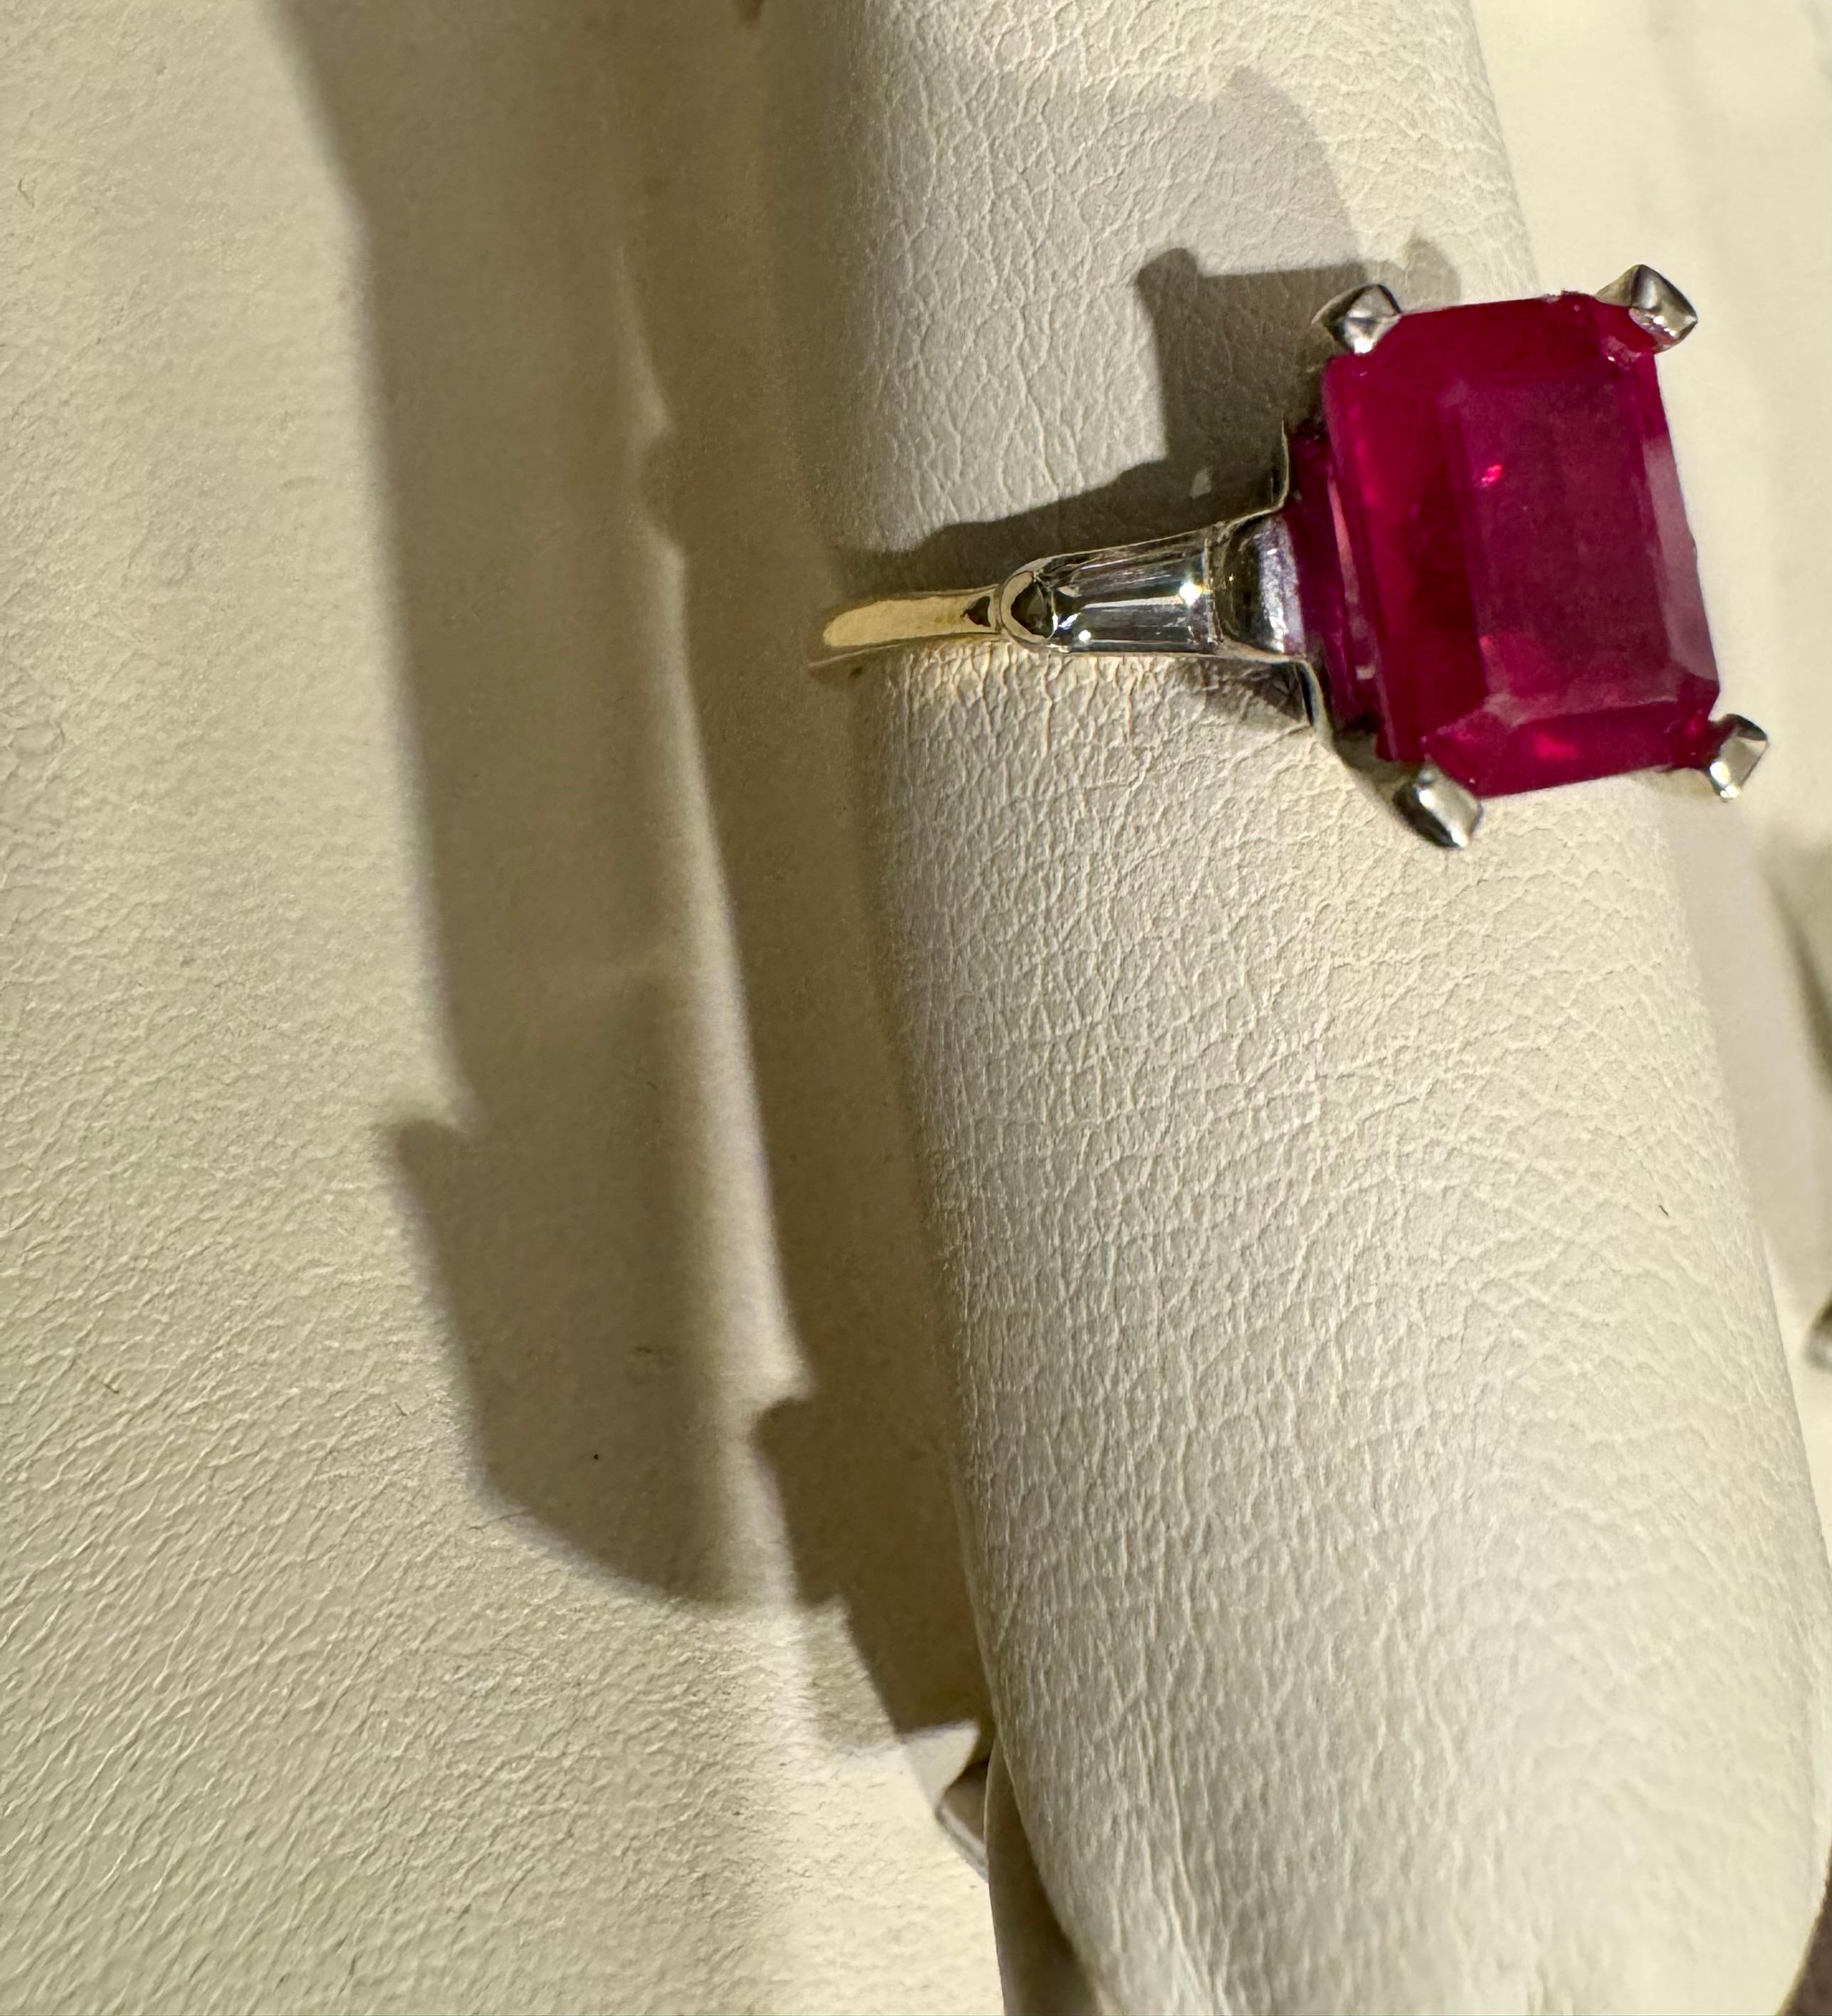 2.5 Ct Emerald Cut Treated Ruby & 0.15 ct Diamond Ring 14 Kt White Gold Size 5 Excellent état - En vente à New York, NY